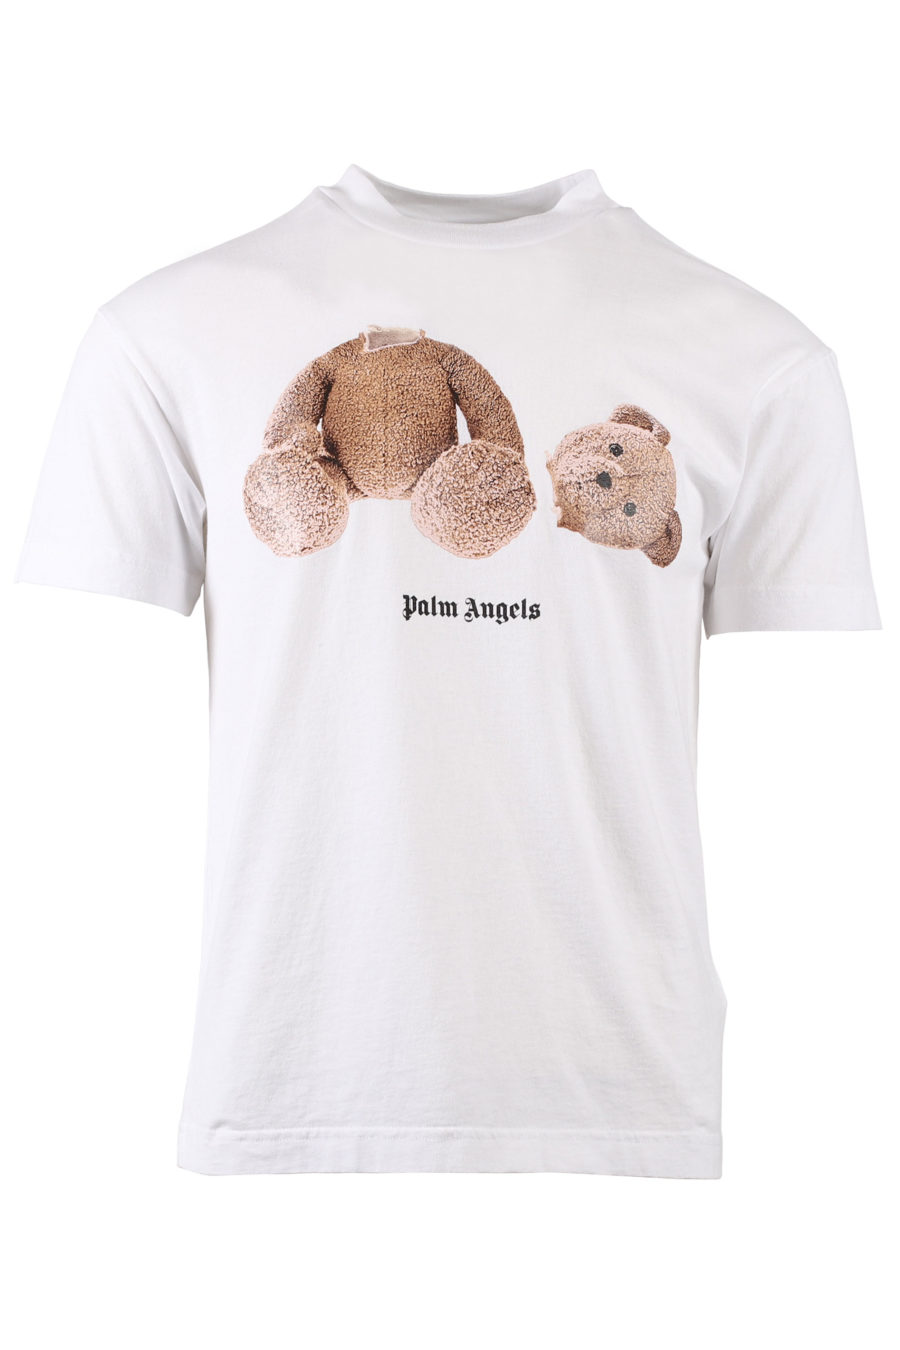 White T-shirt with bear and logo on the back - IMG 1352 m